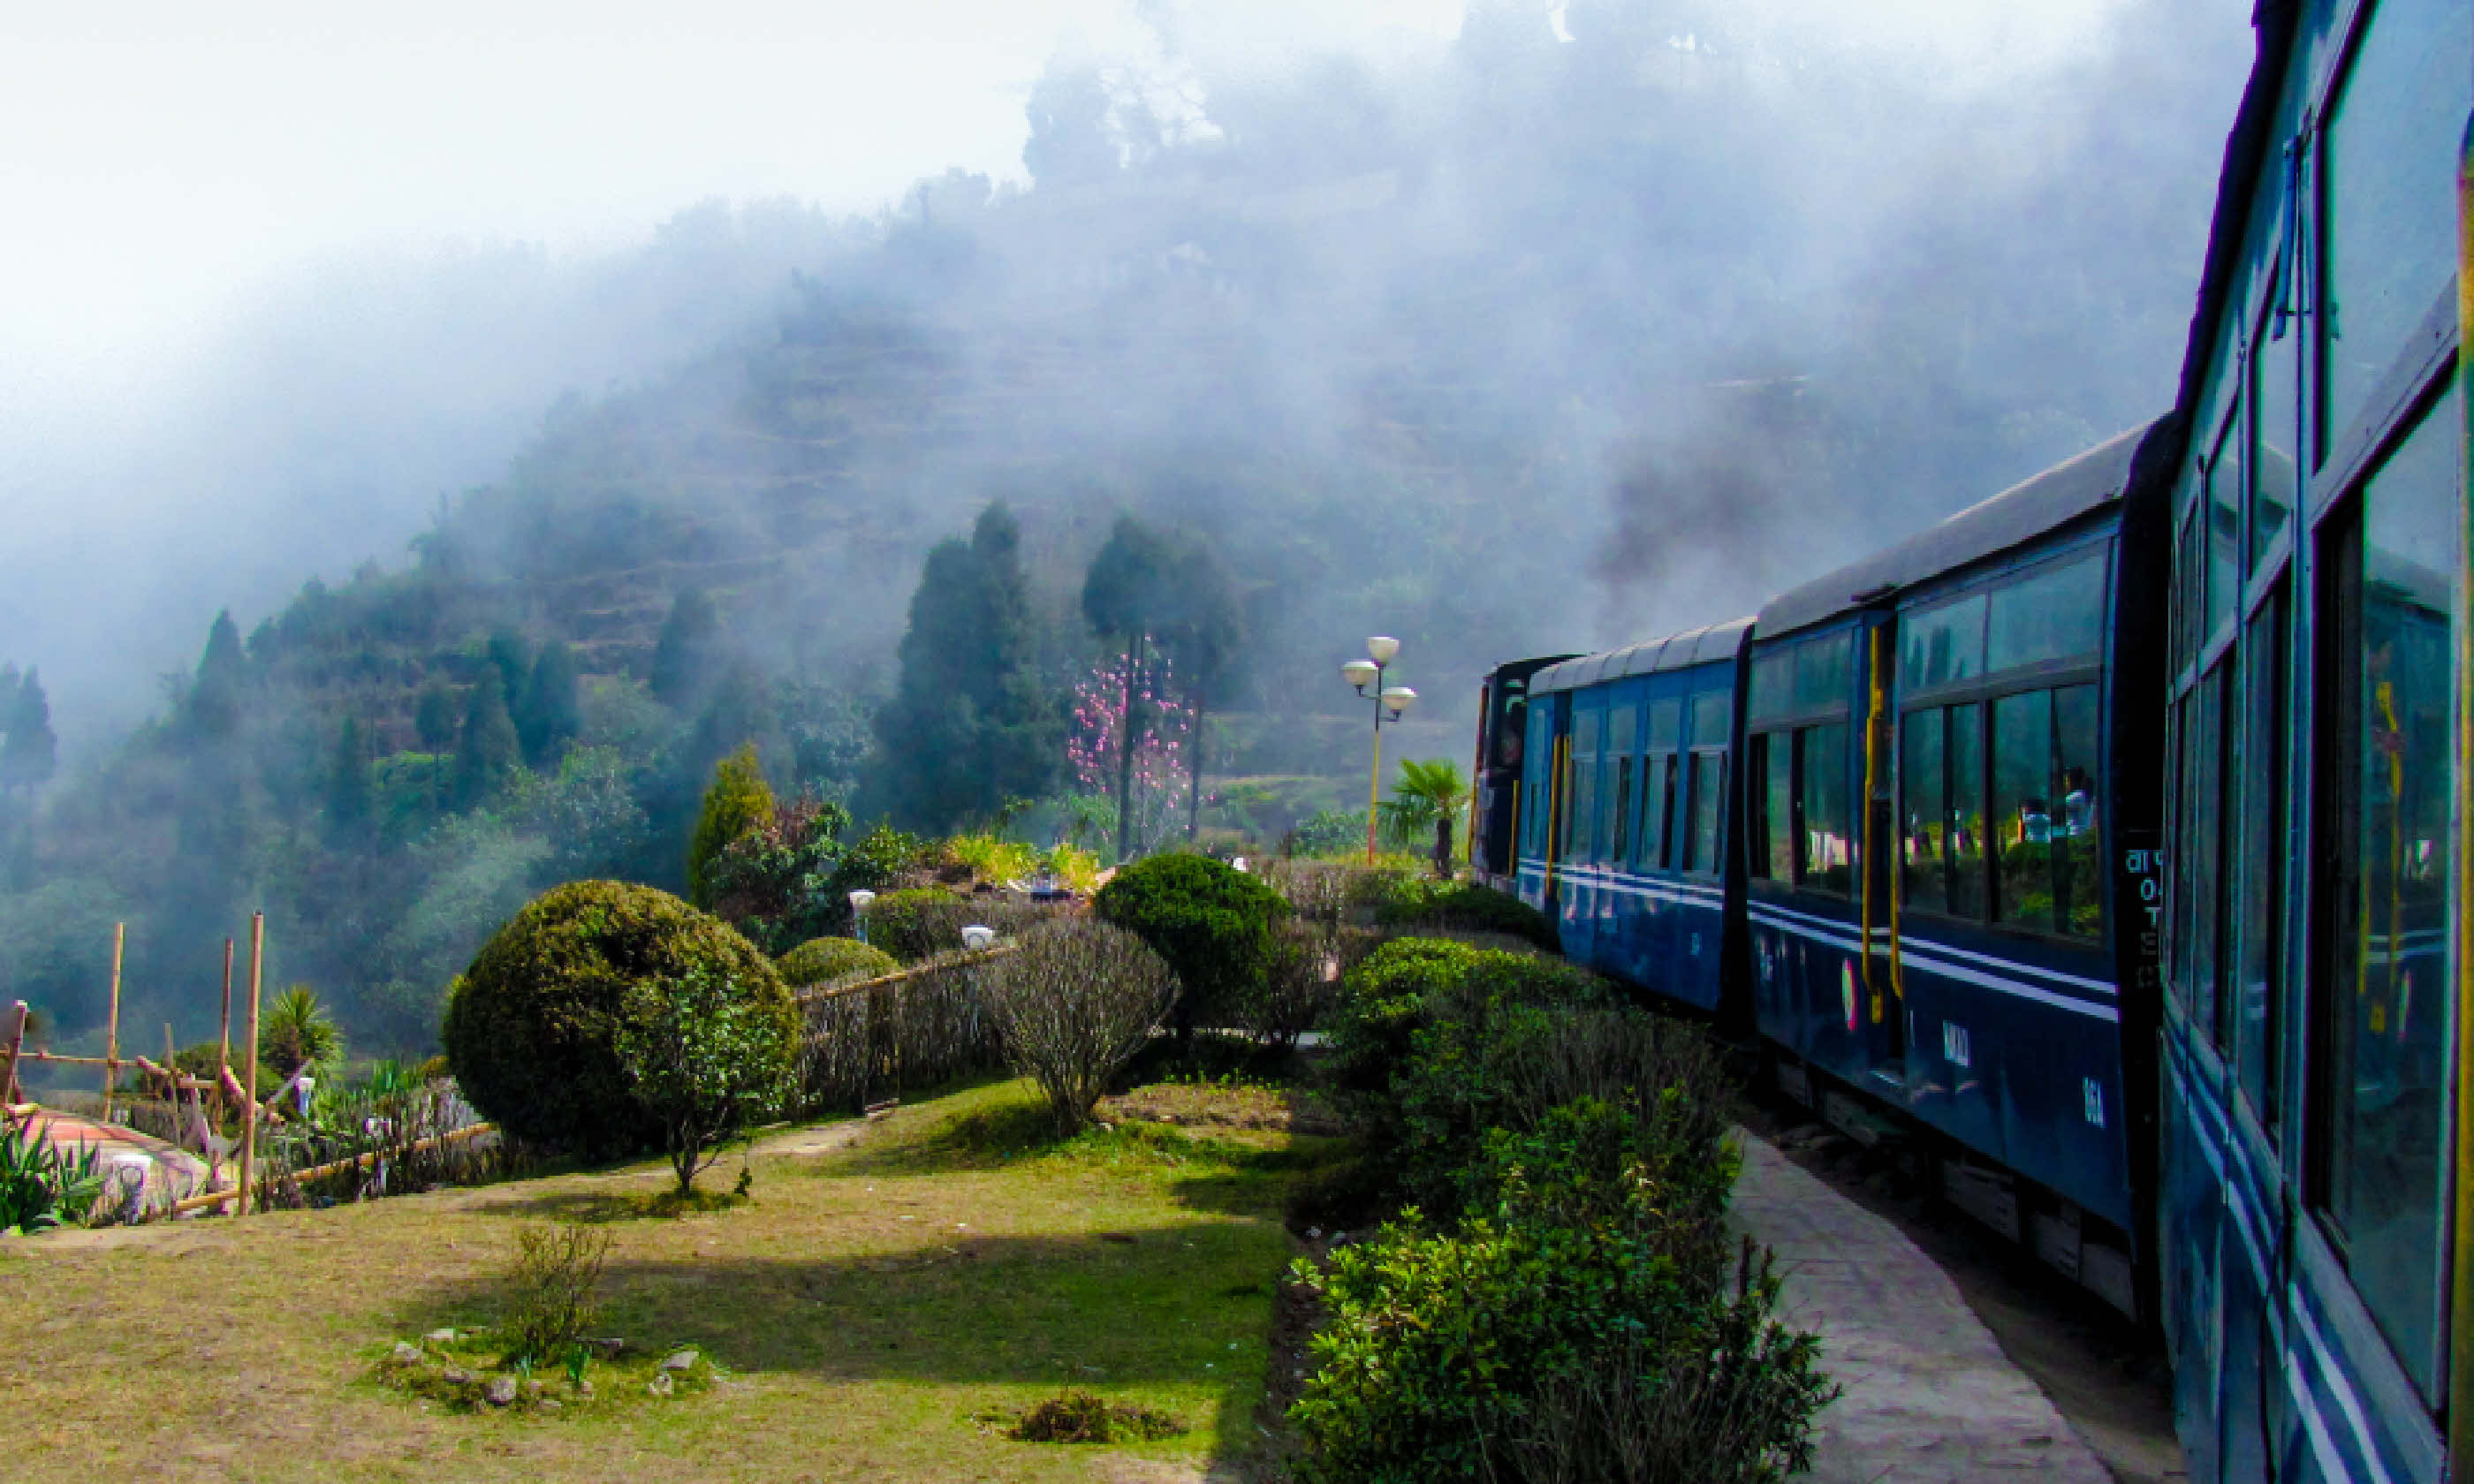 Travelling India by train (Shutterstock: see credit below)